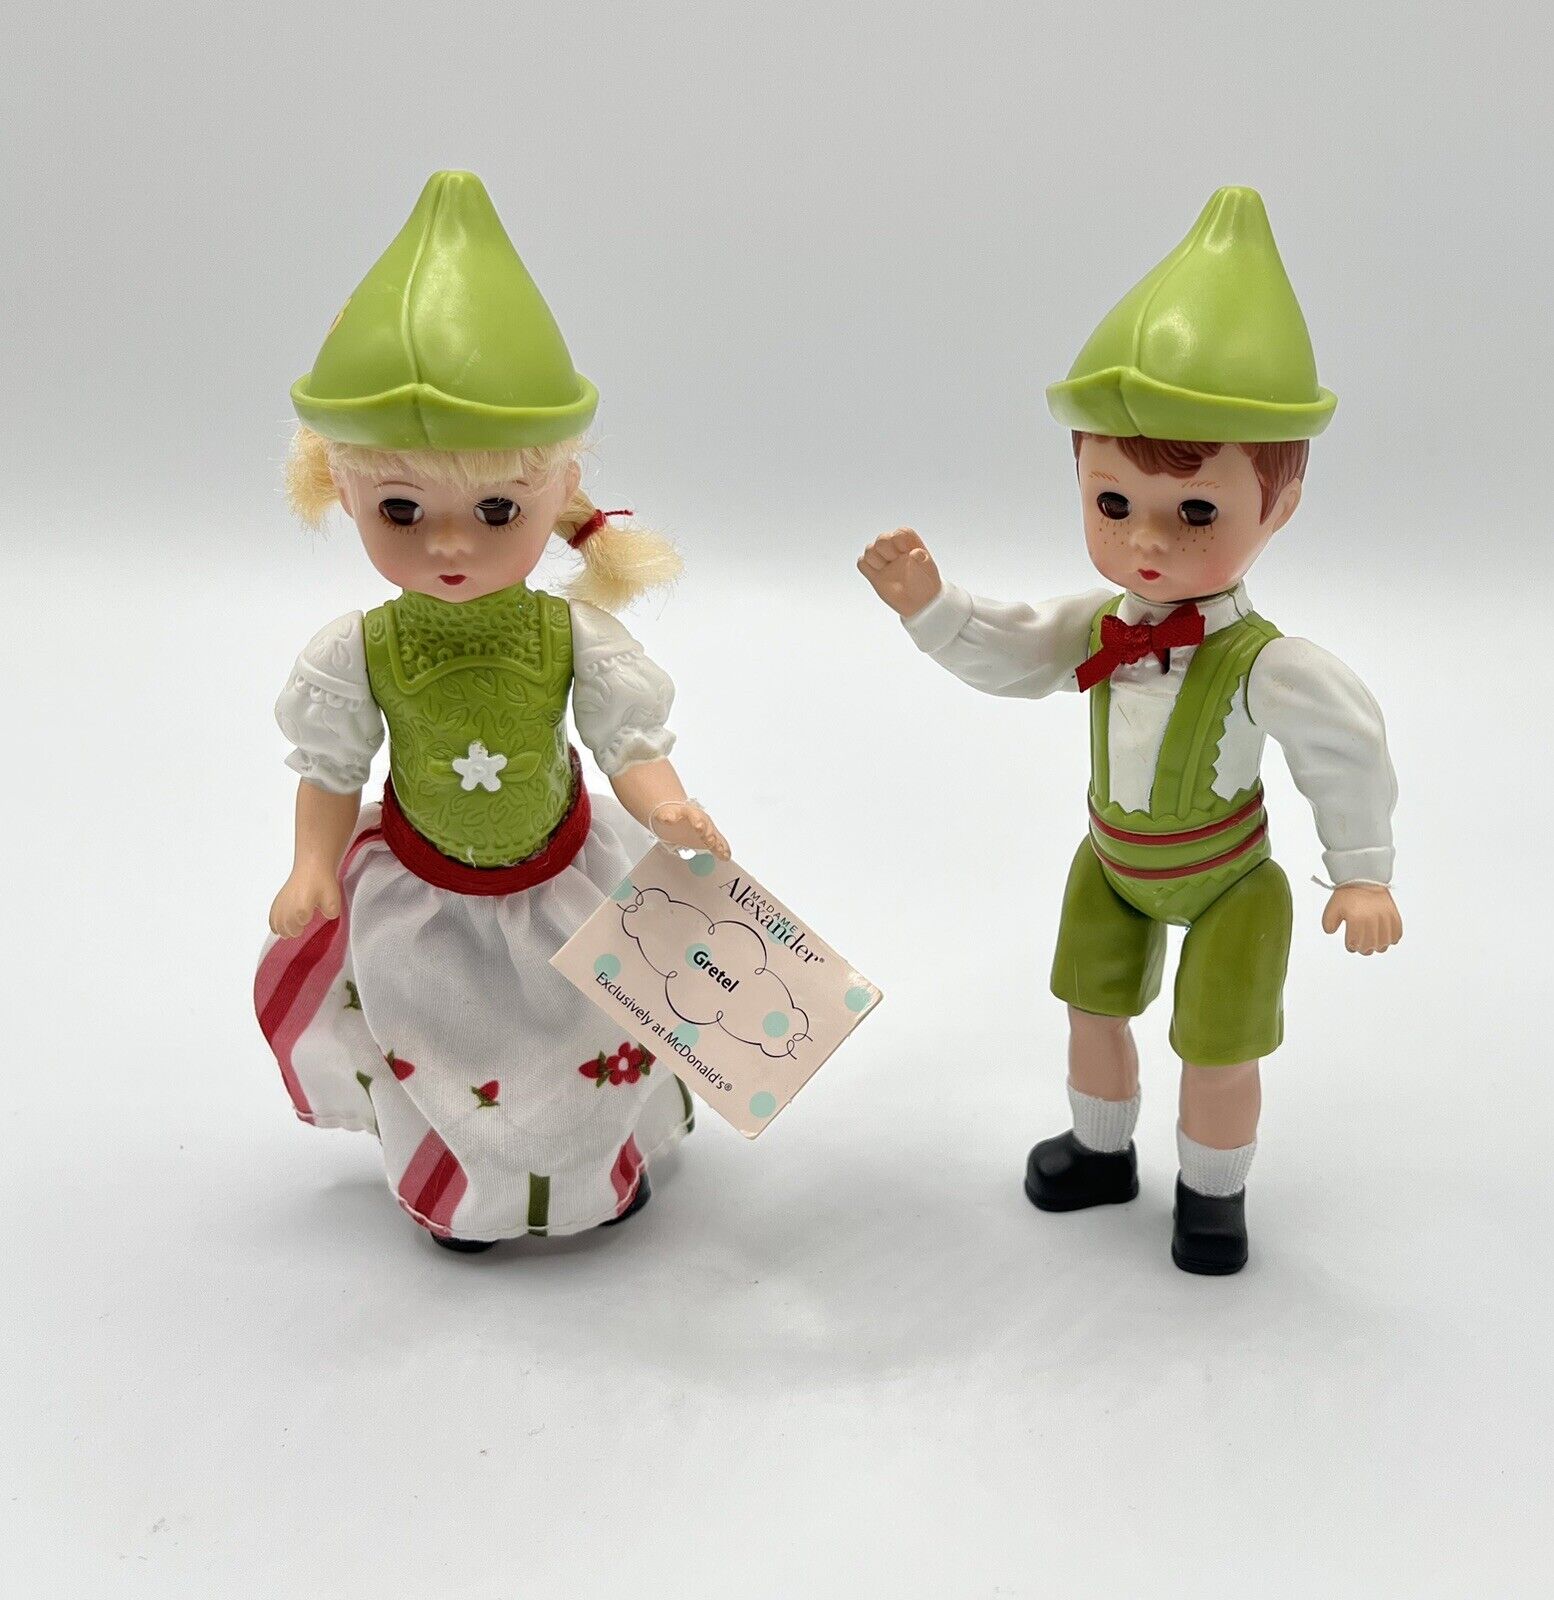 2010 McDonalds Collectible Doll’s Madame Alexander Hansel And Gretel